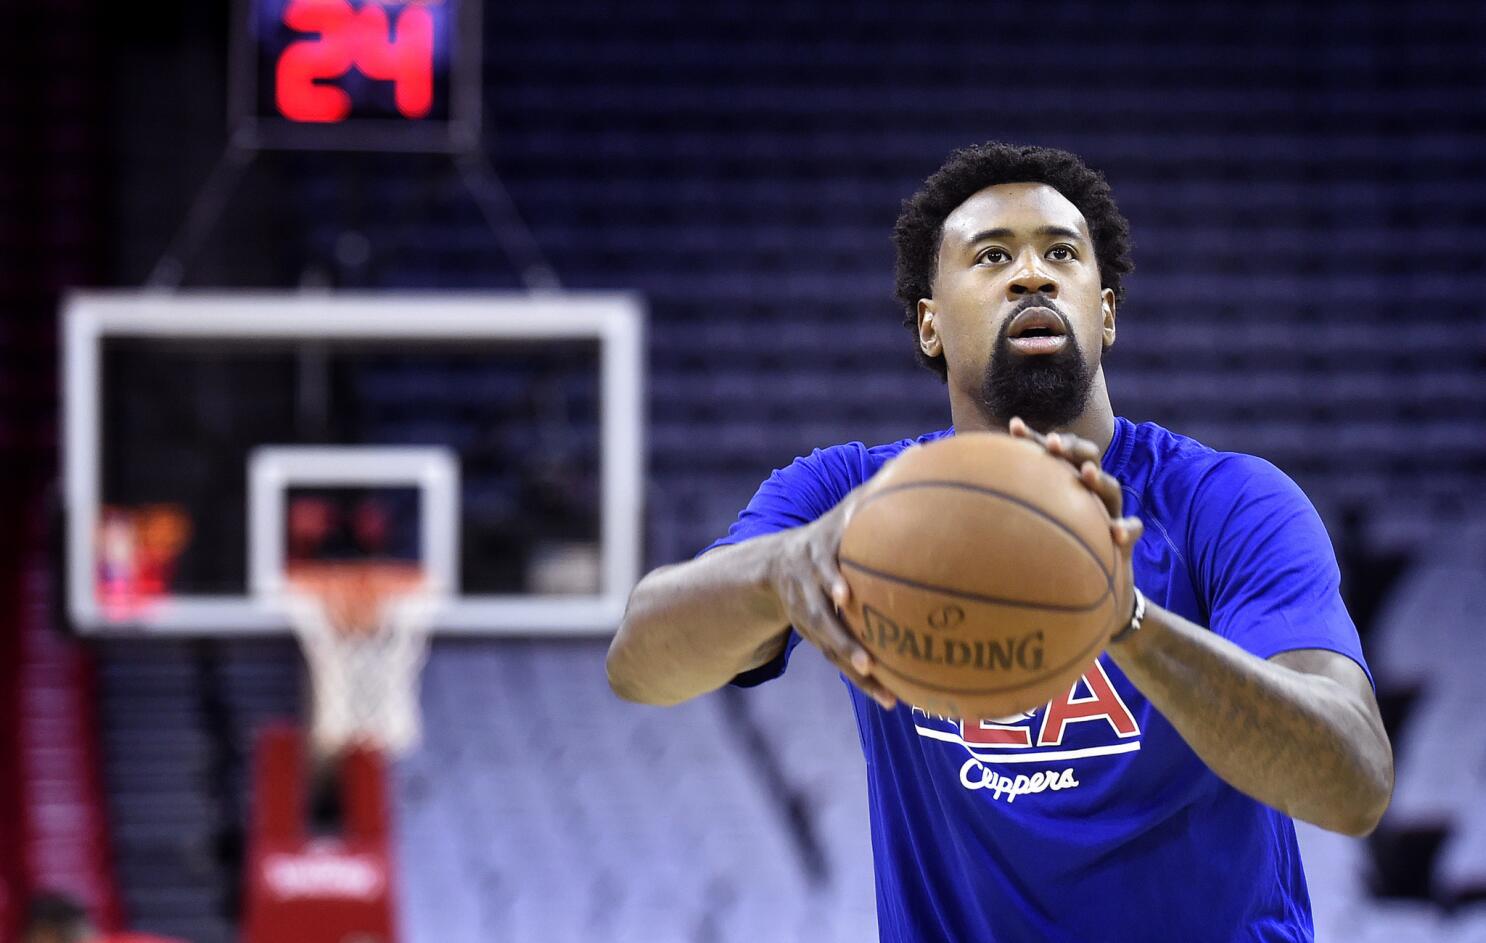 DeAndre Jordan Re-Signs With Clippers As Teammates Camped Out at